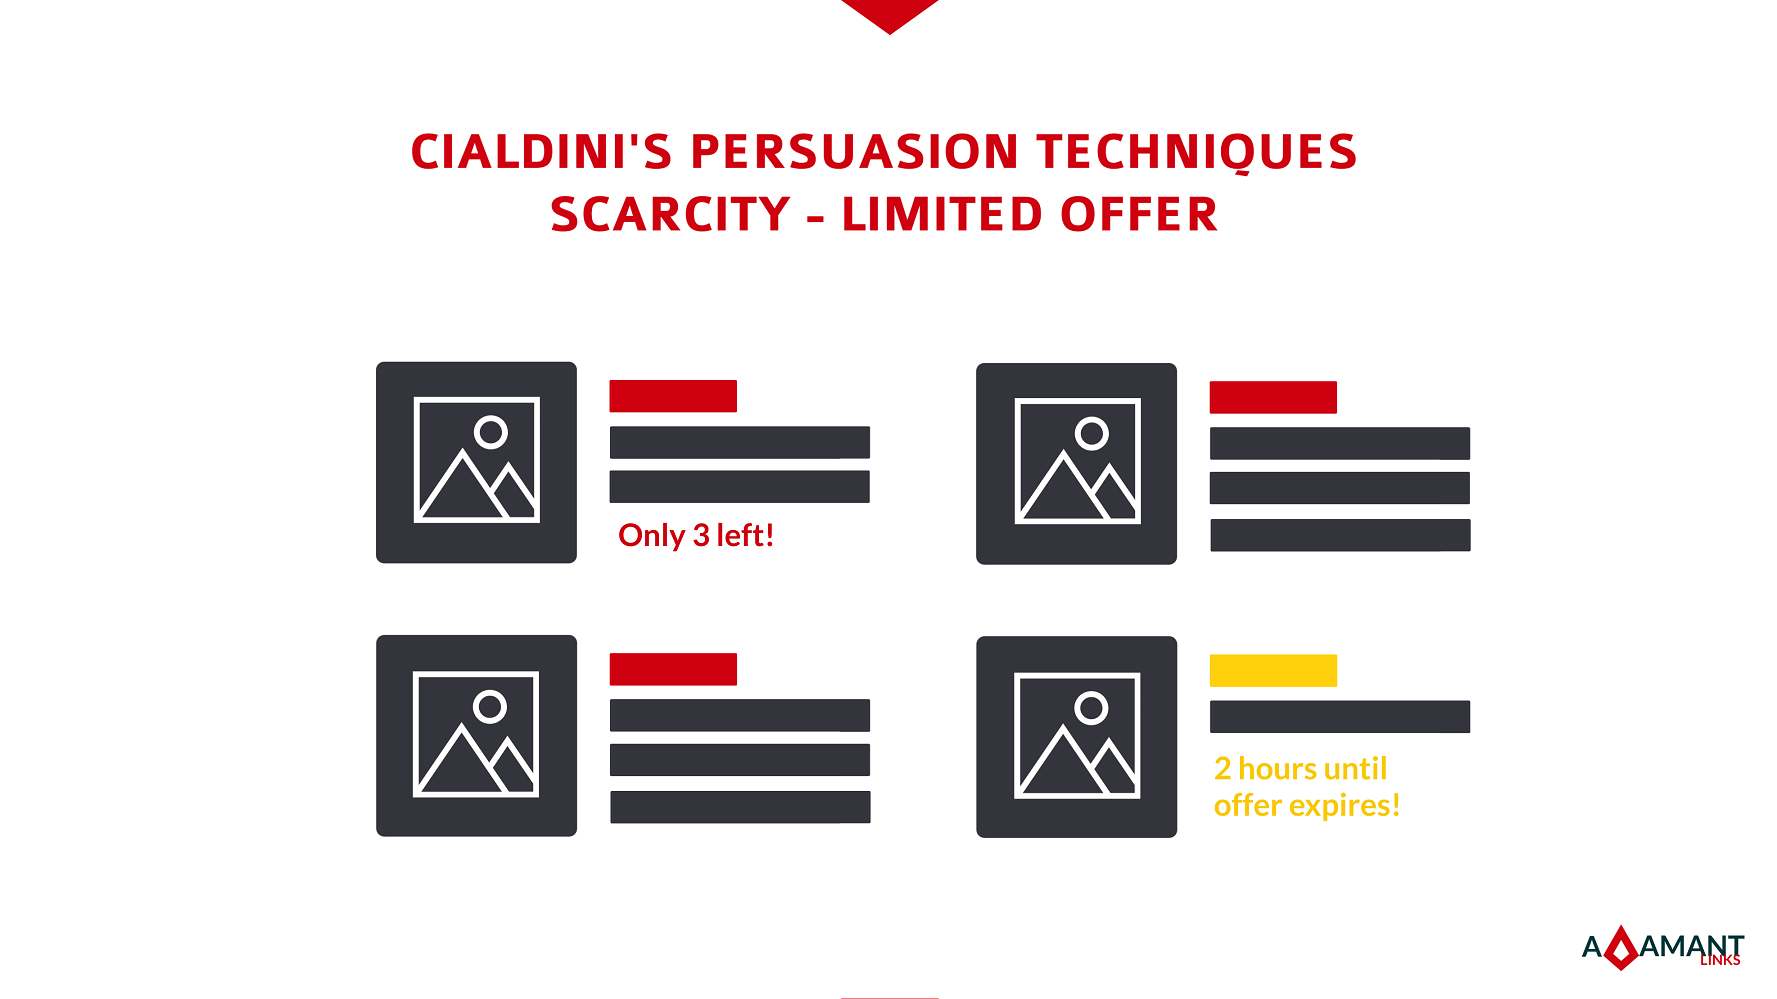 Adamant Links - Cialdini's Persuasion Techniques - Scarcity: Limited Offer